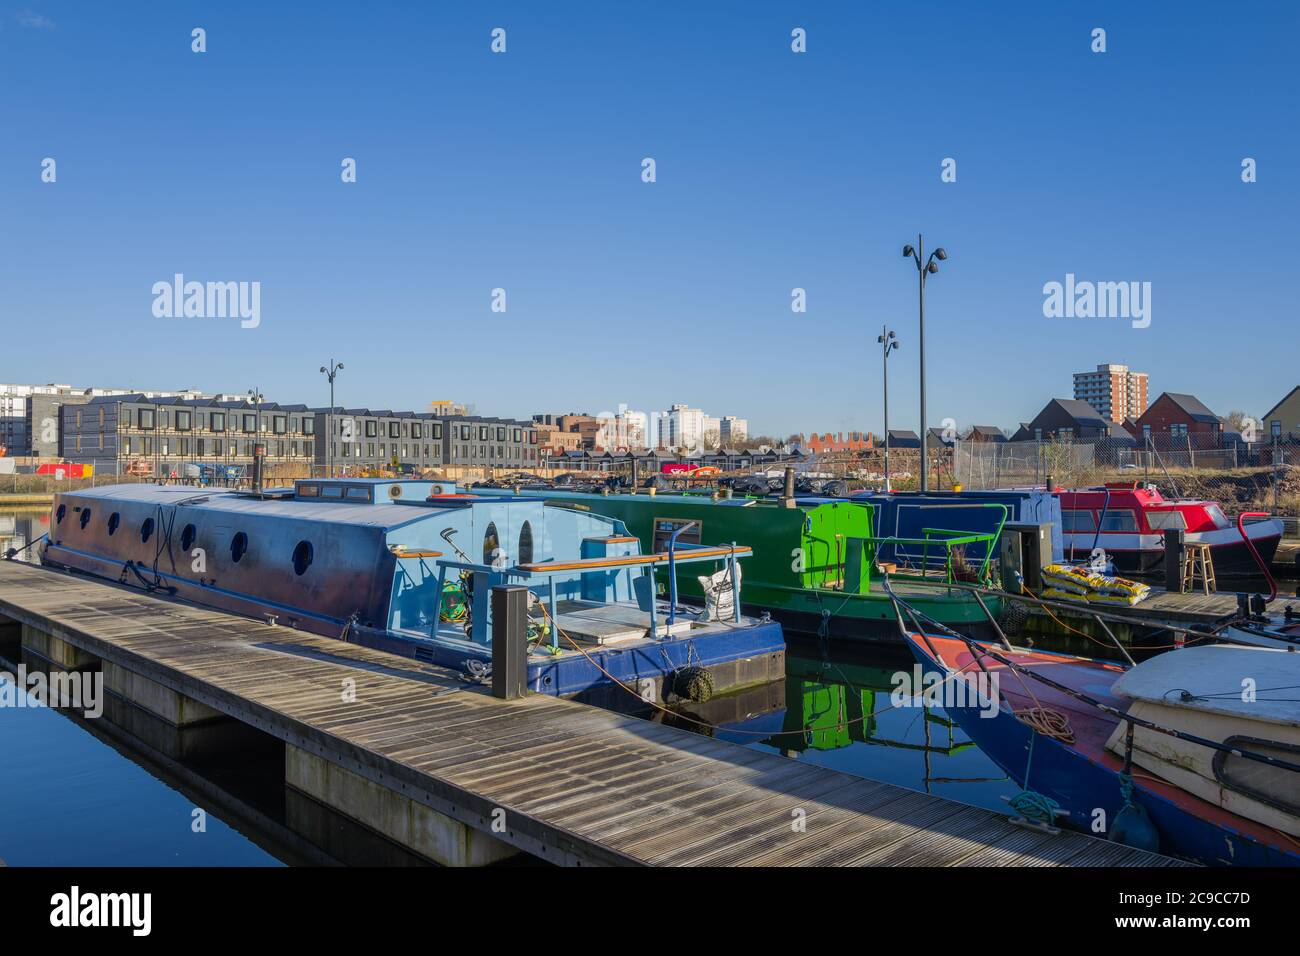 City living - canal boats on New Islington Marina. Photo features development of townhouses by Urban Splash. All council tower blocks on the horizon. Stock Photo